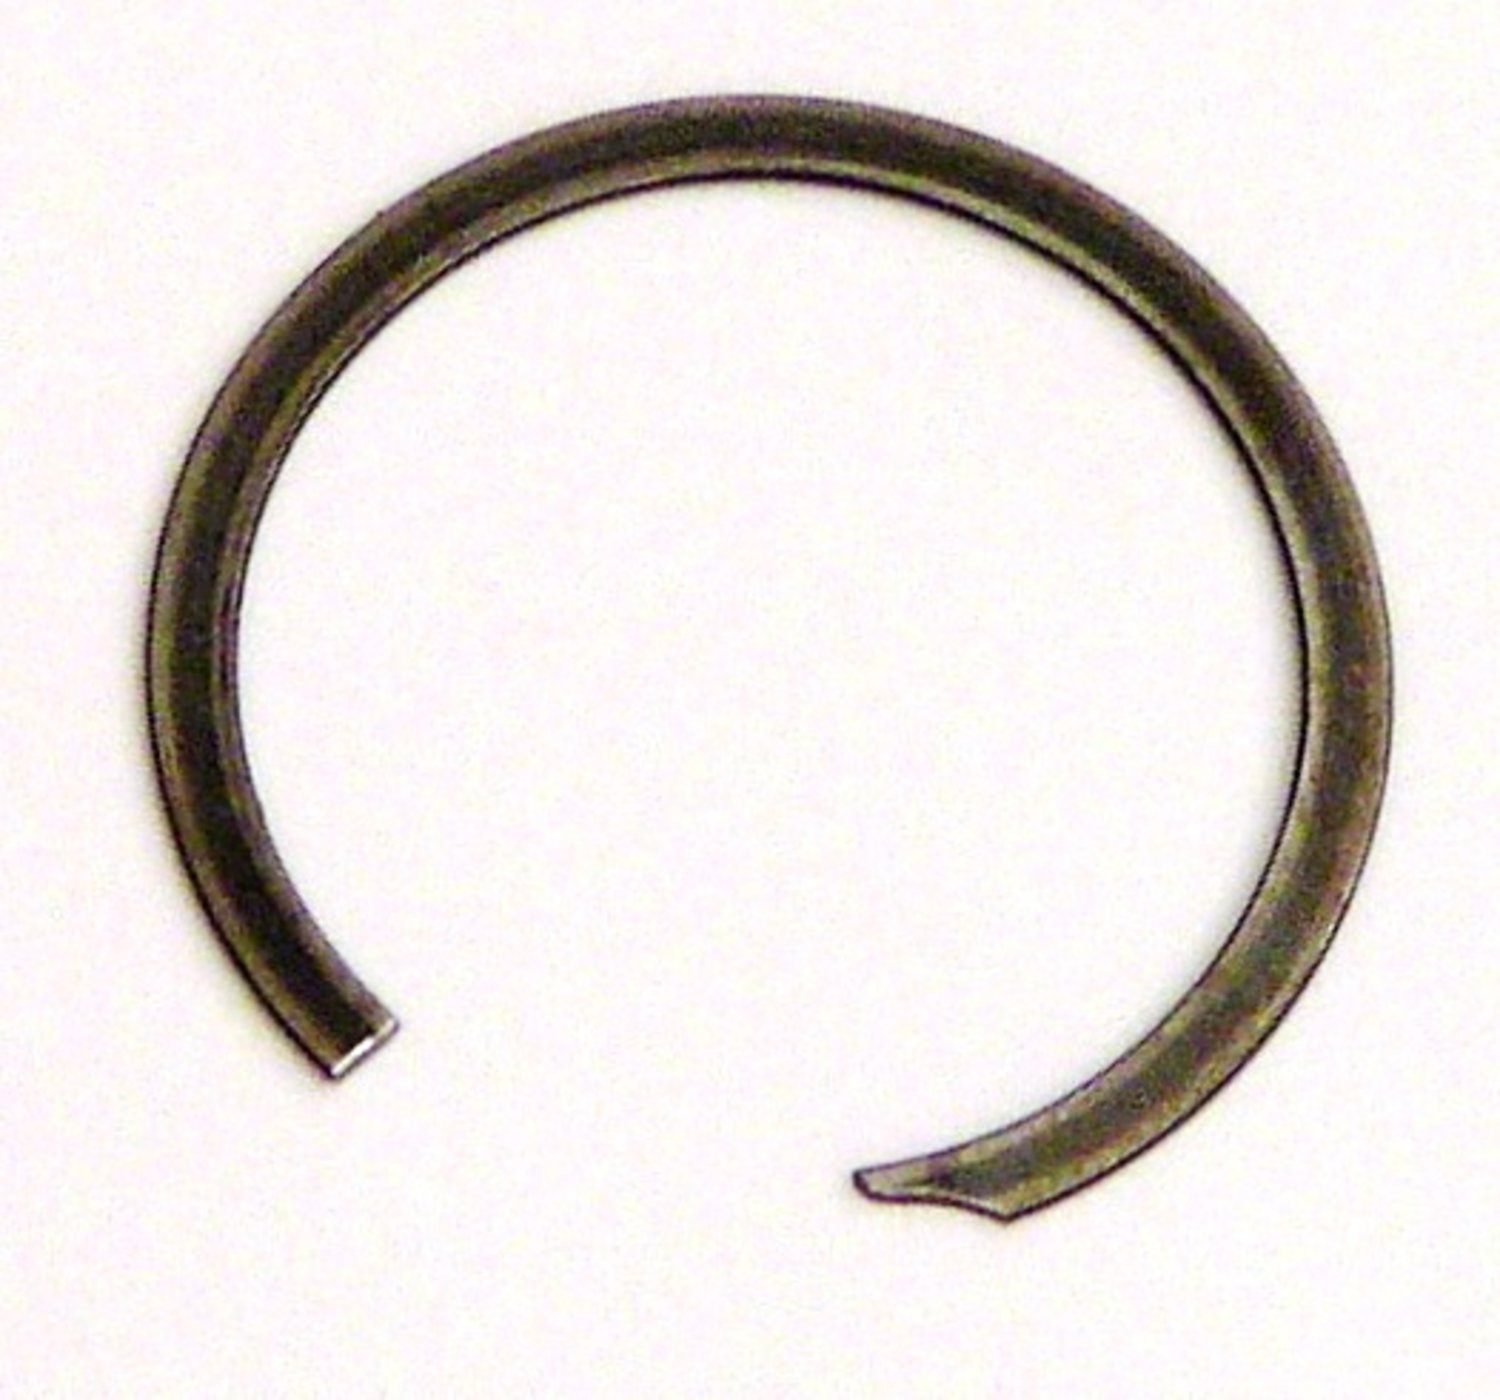 7010307937 - 3M Retaining Ring A0018